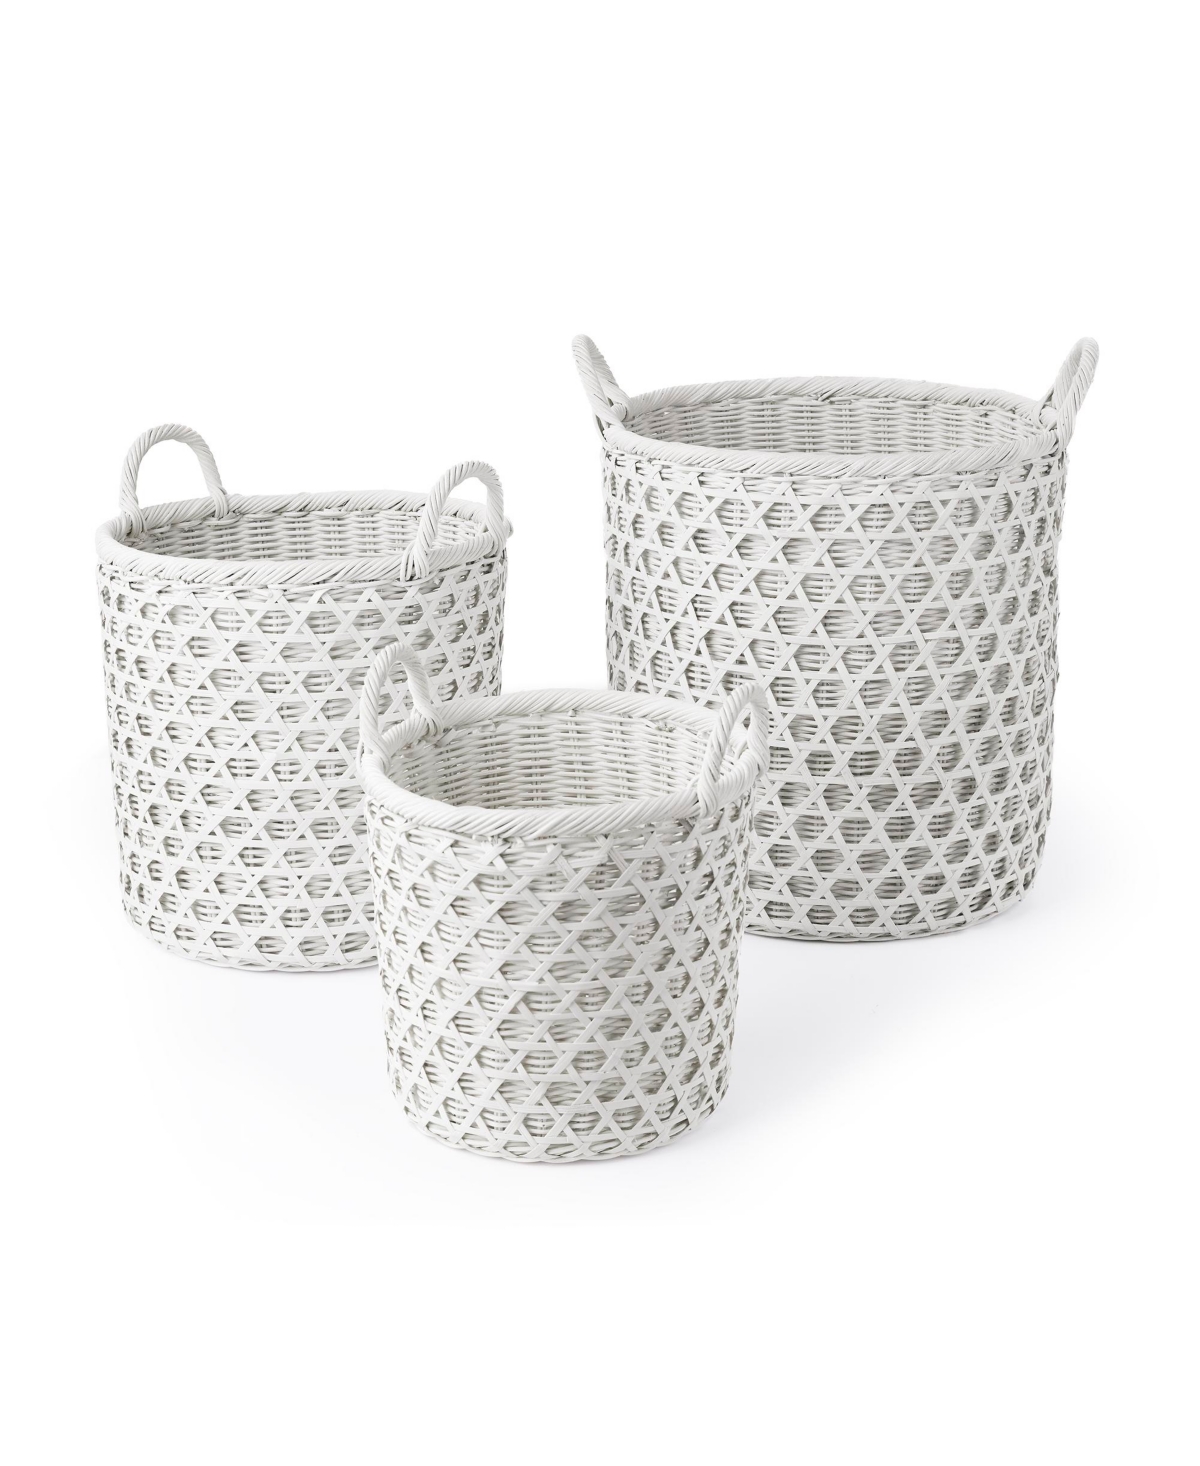 Baum 3 Piece Round Rattan And Bamboo Caning Basket Set With Ear Handles In White